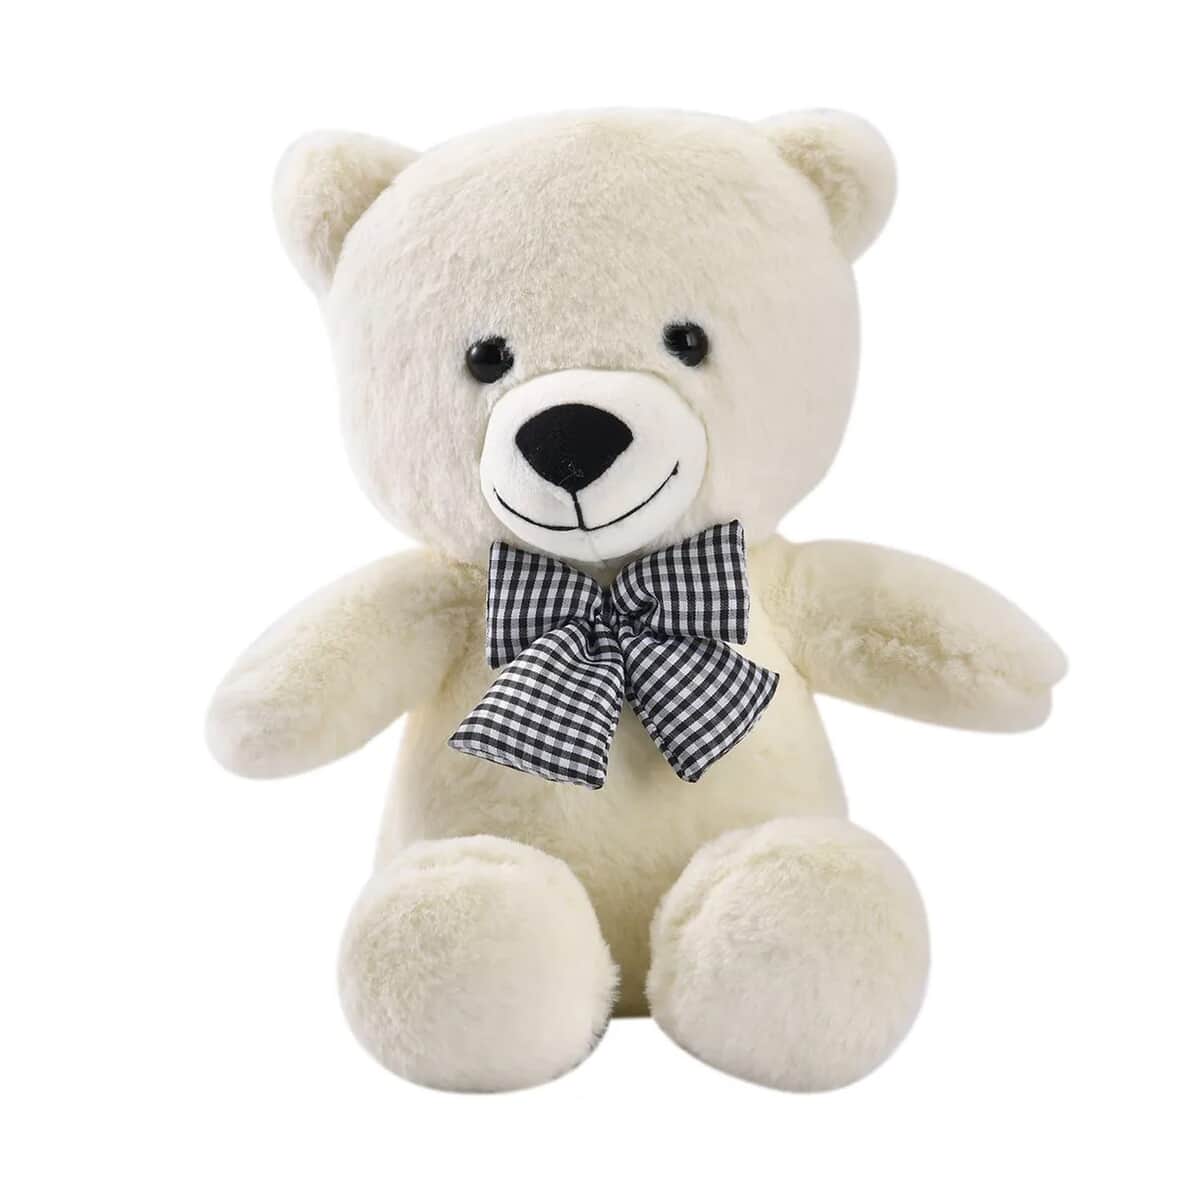 Off White Teddy Bear Toy with Zipper Bag (10 In) image number 0